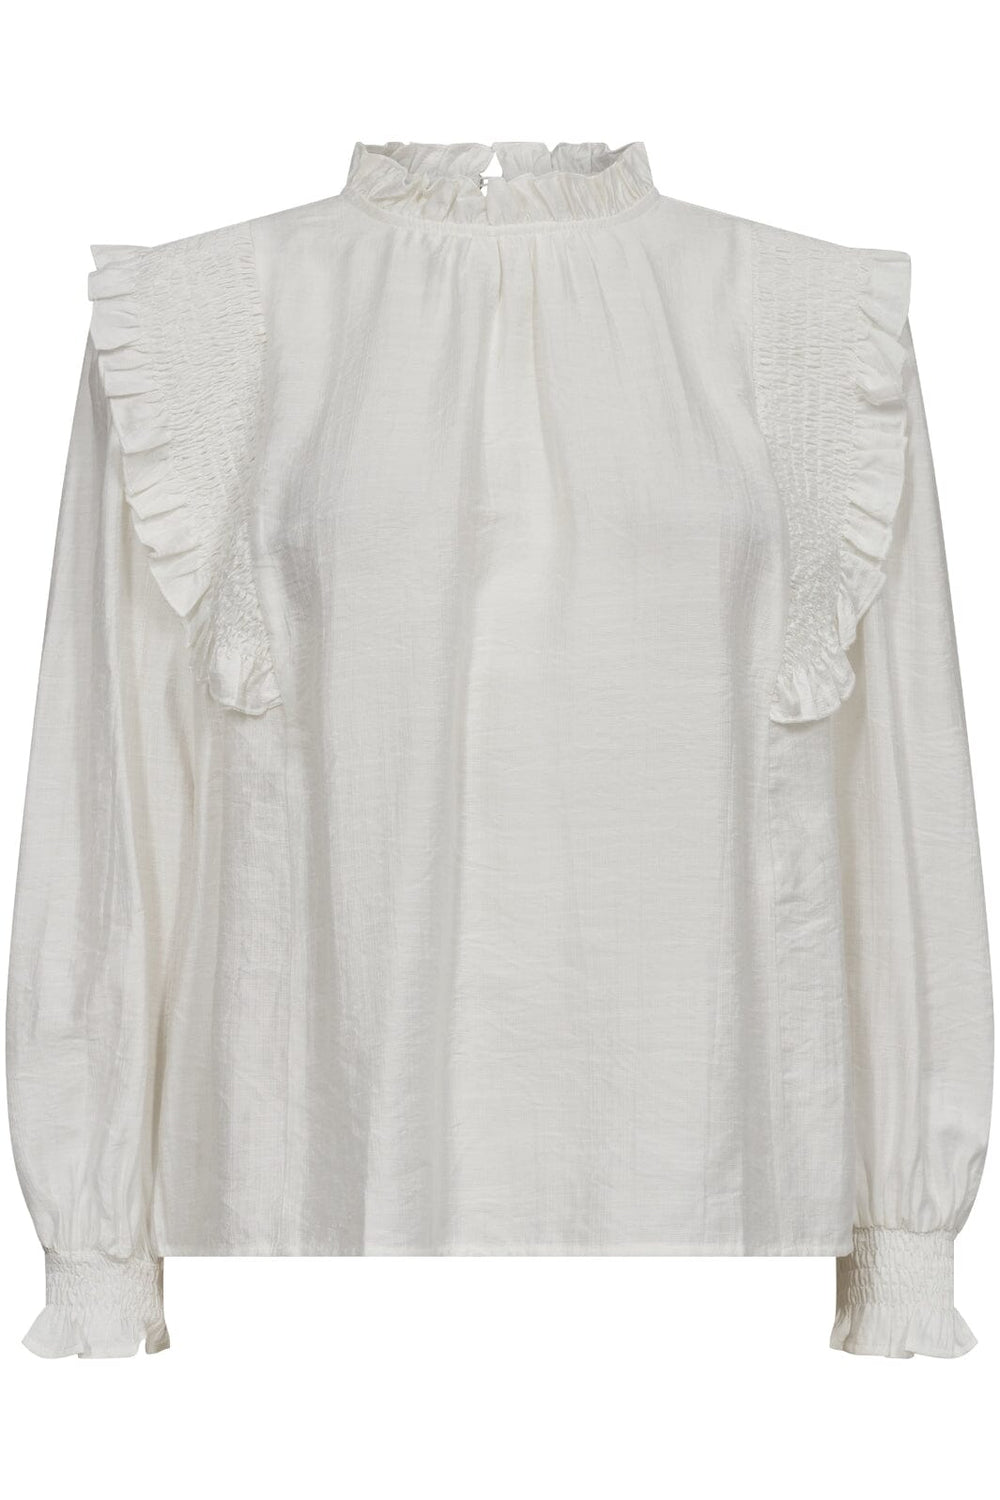 Forudbestilling - Co´couture - Anguscc Smock Frill Blouse 35391 - 635 Stone Bluser 